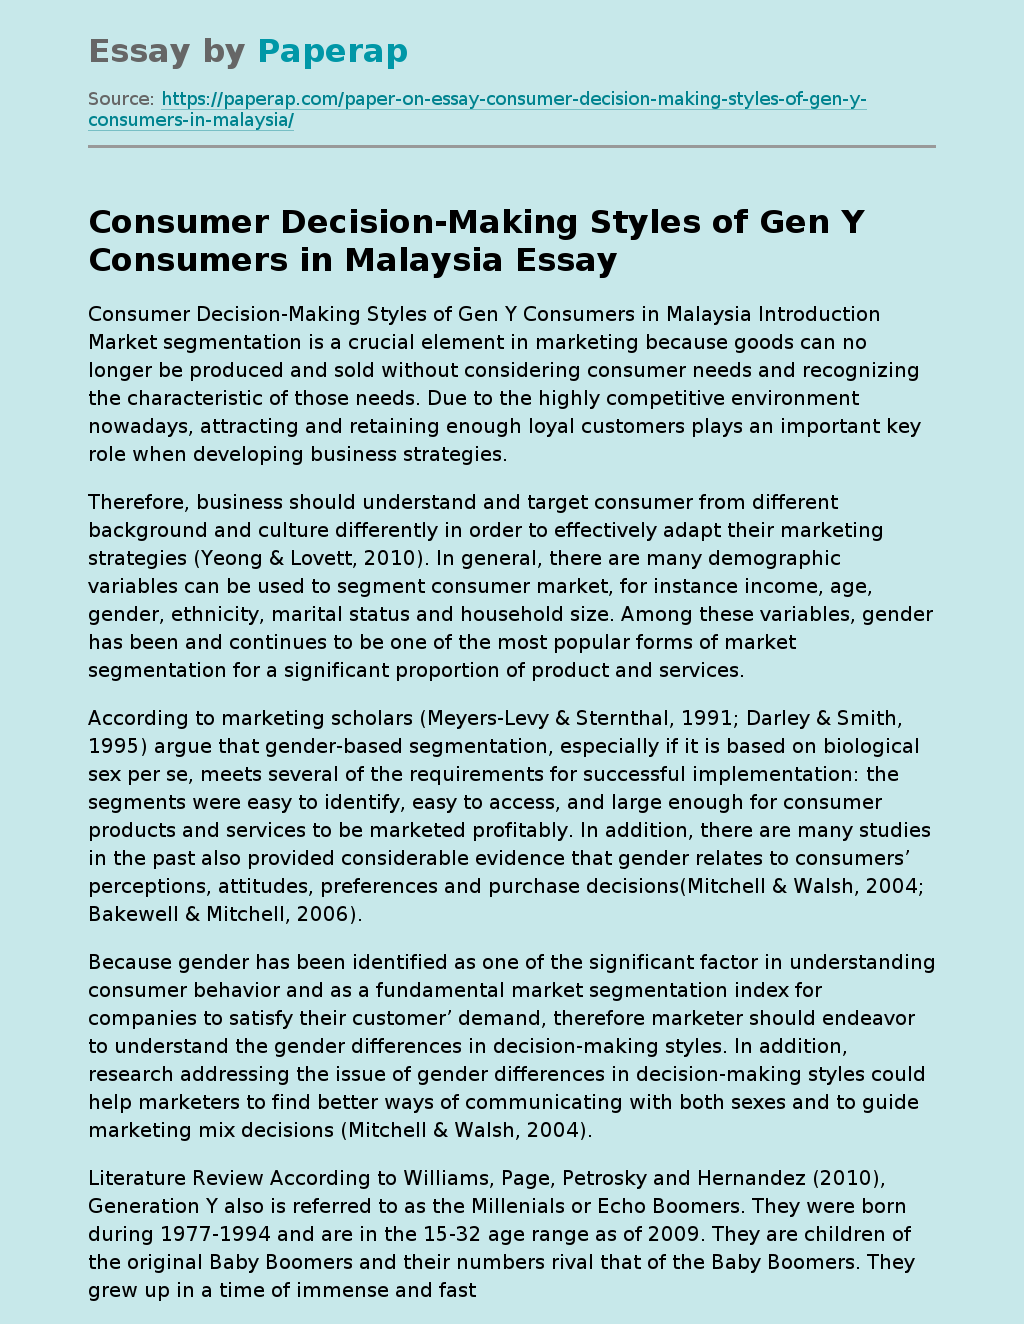 Consumer Decision-Making Styles of Gen Y Consumers in Malaysia